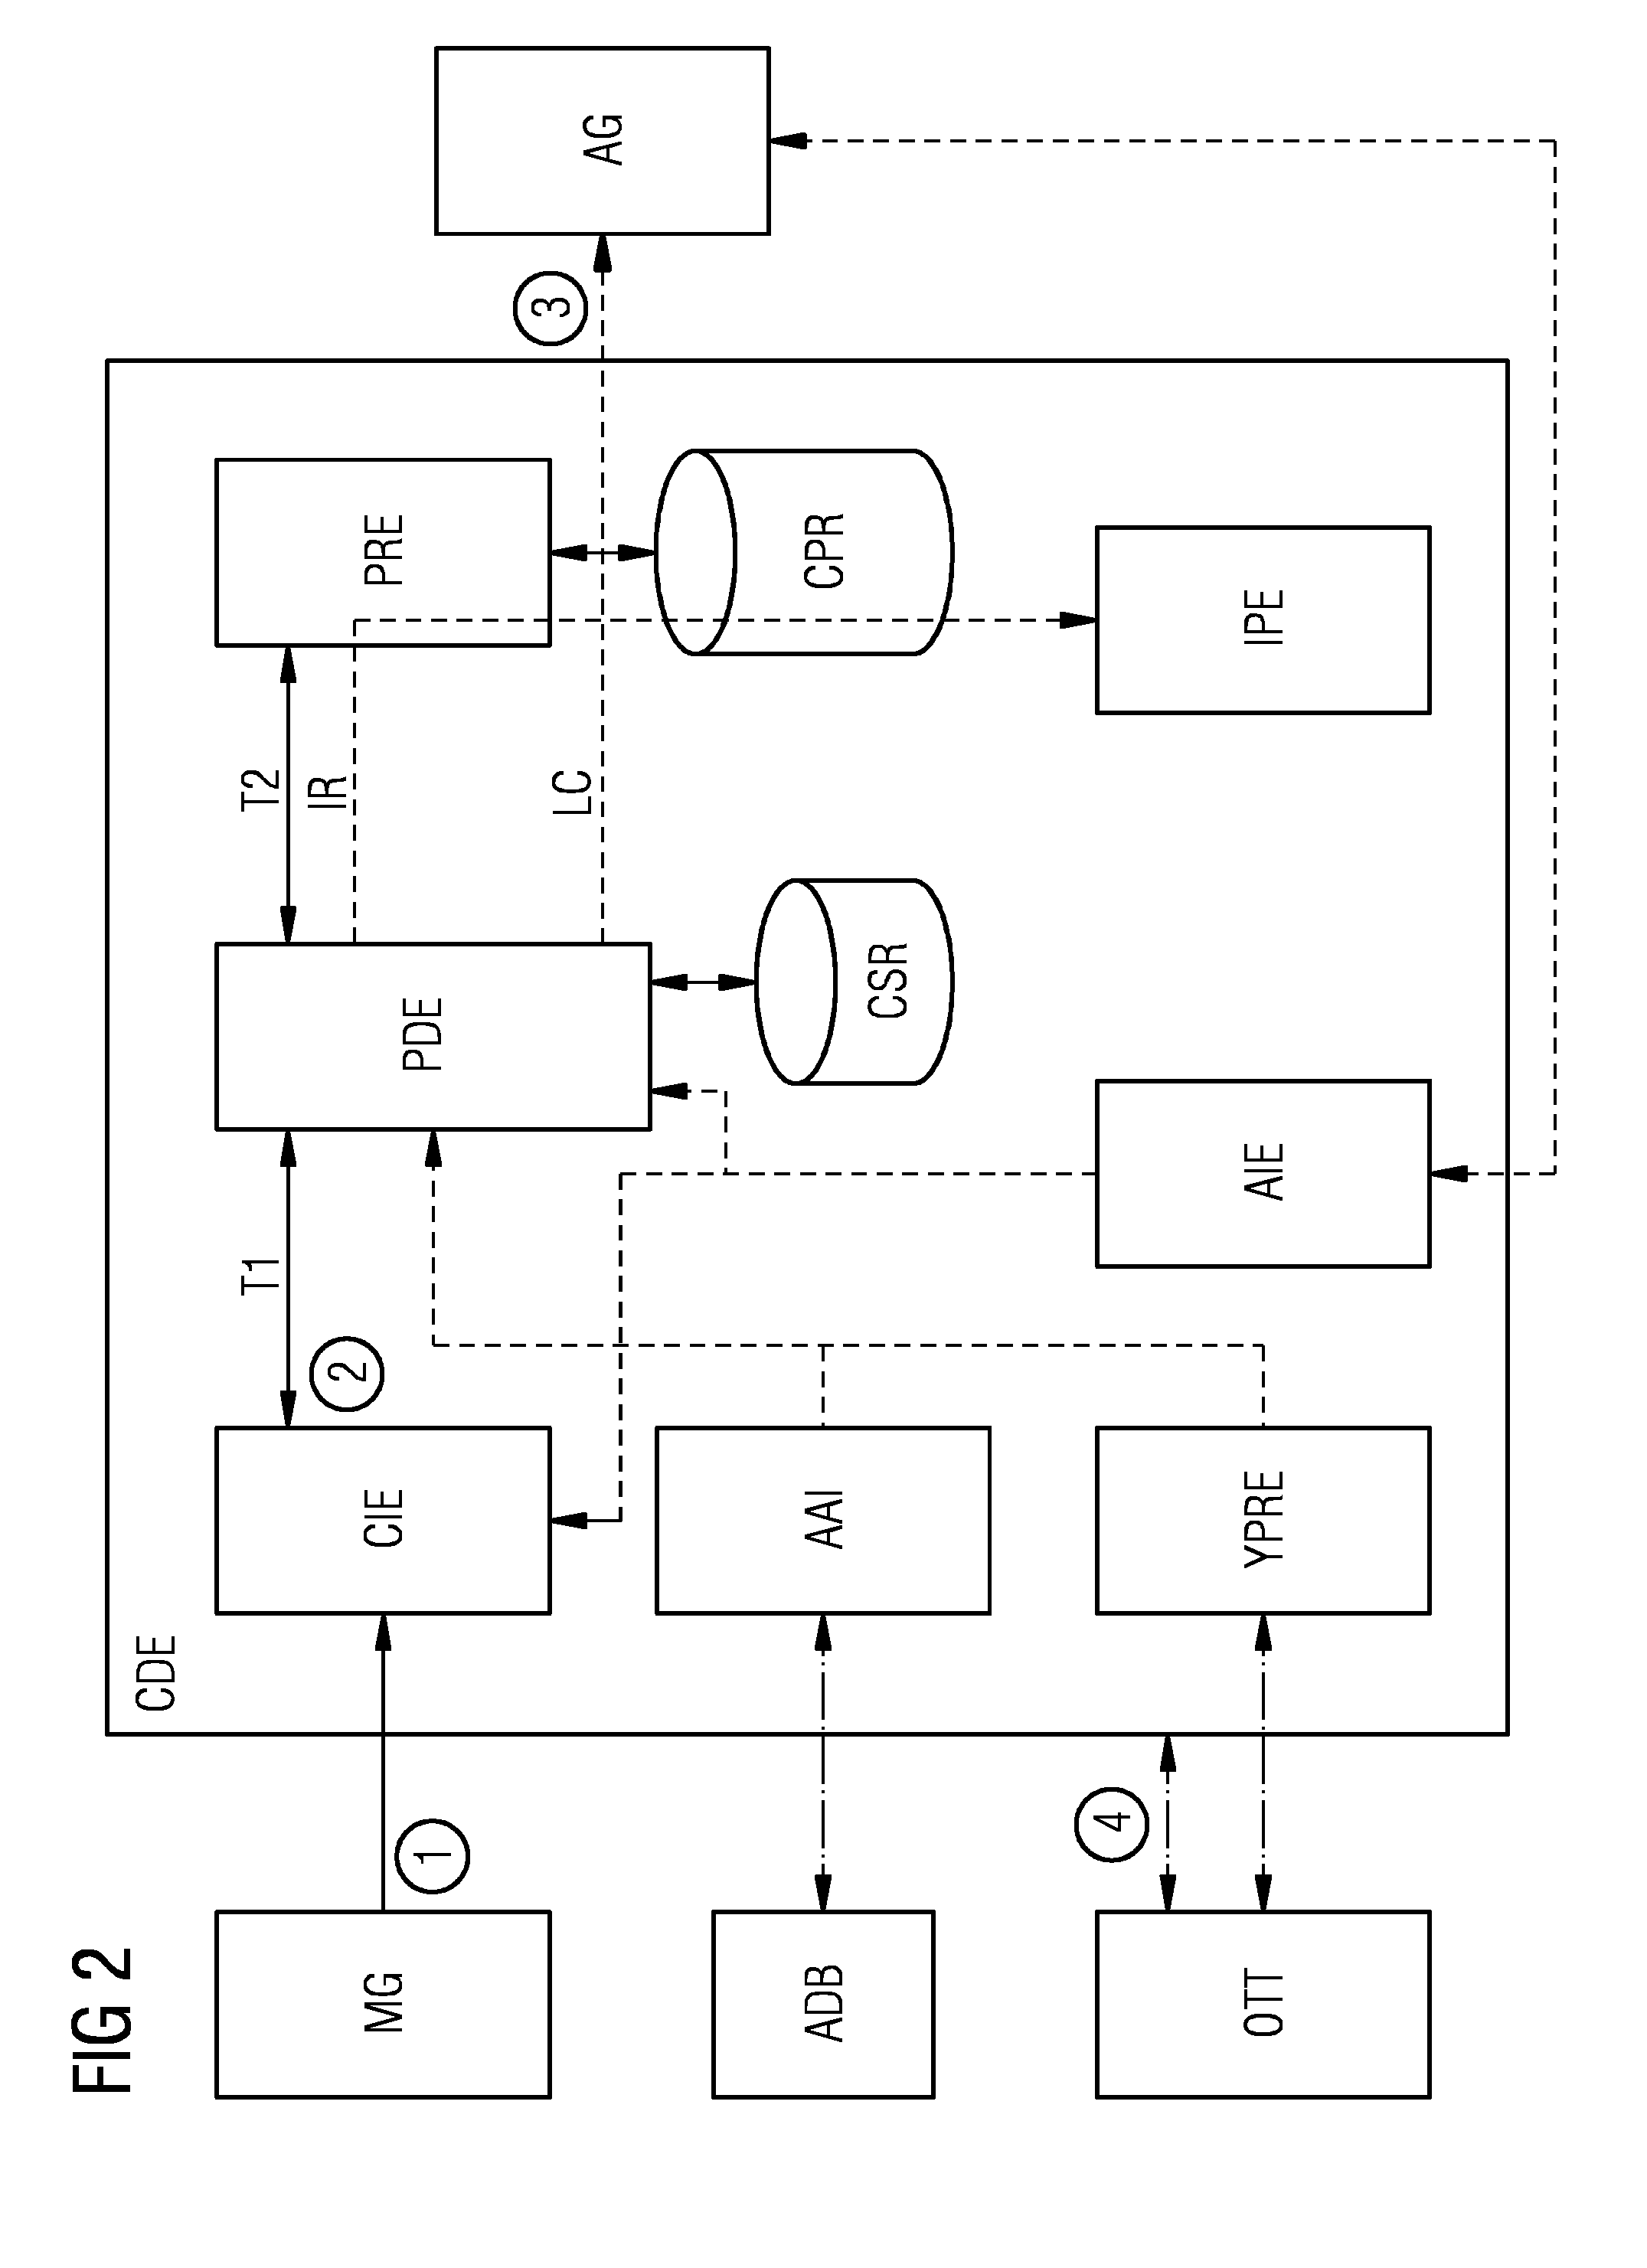 Method and system for coupling a mobile device to an output device